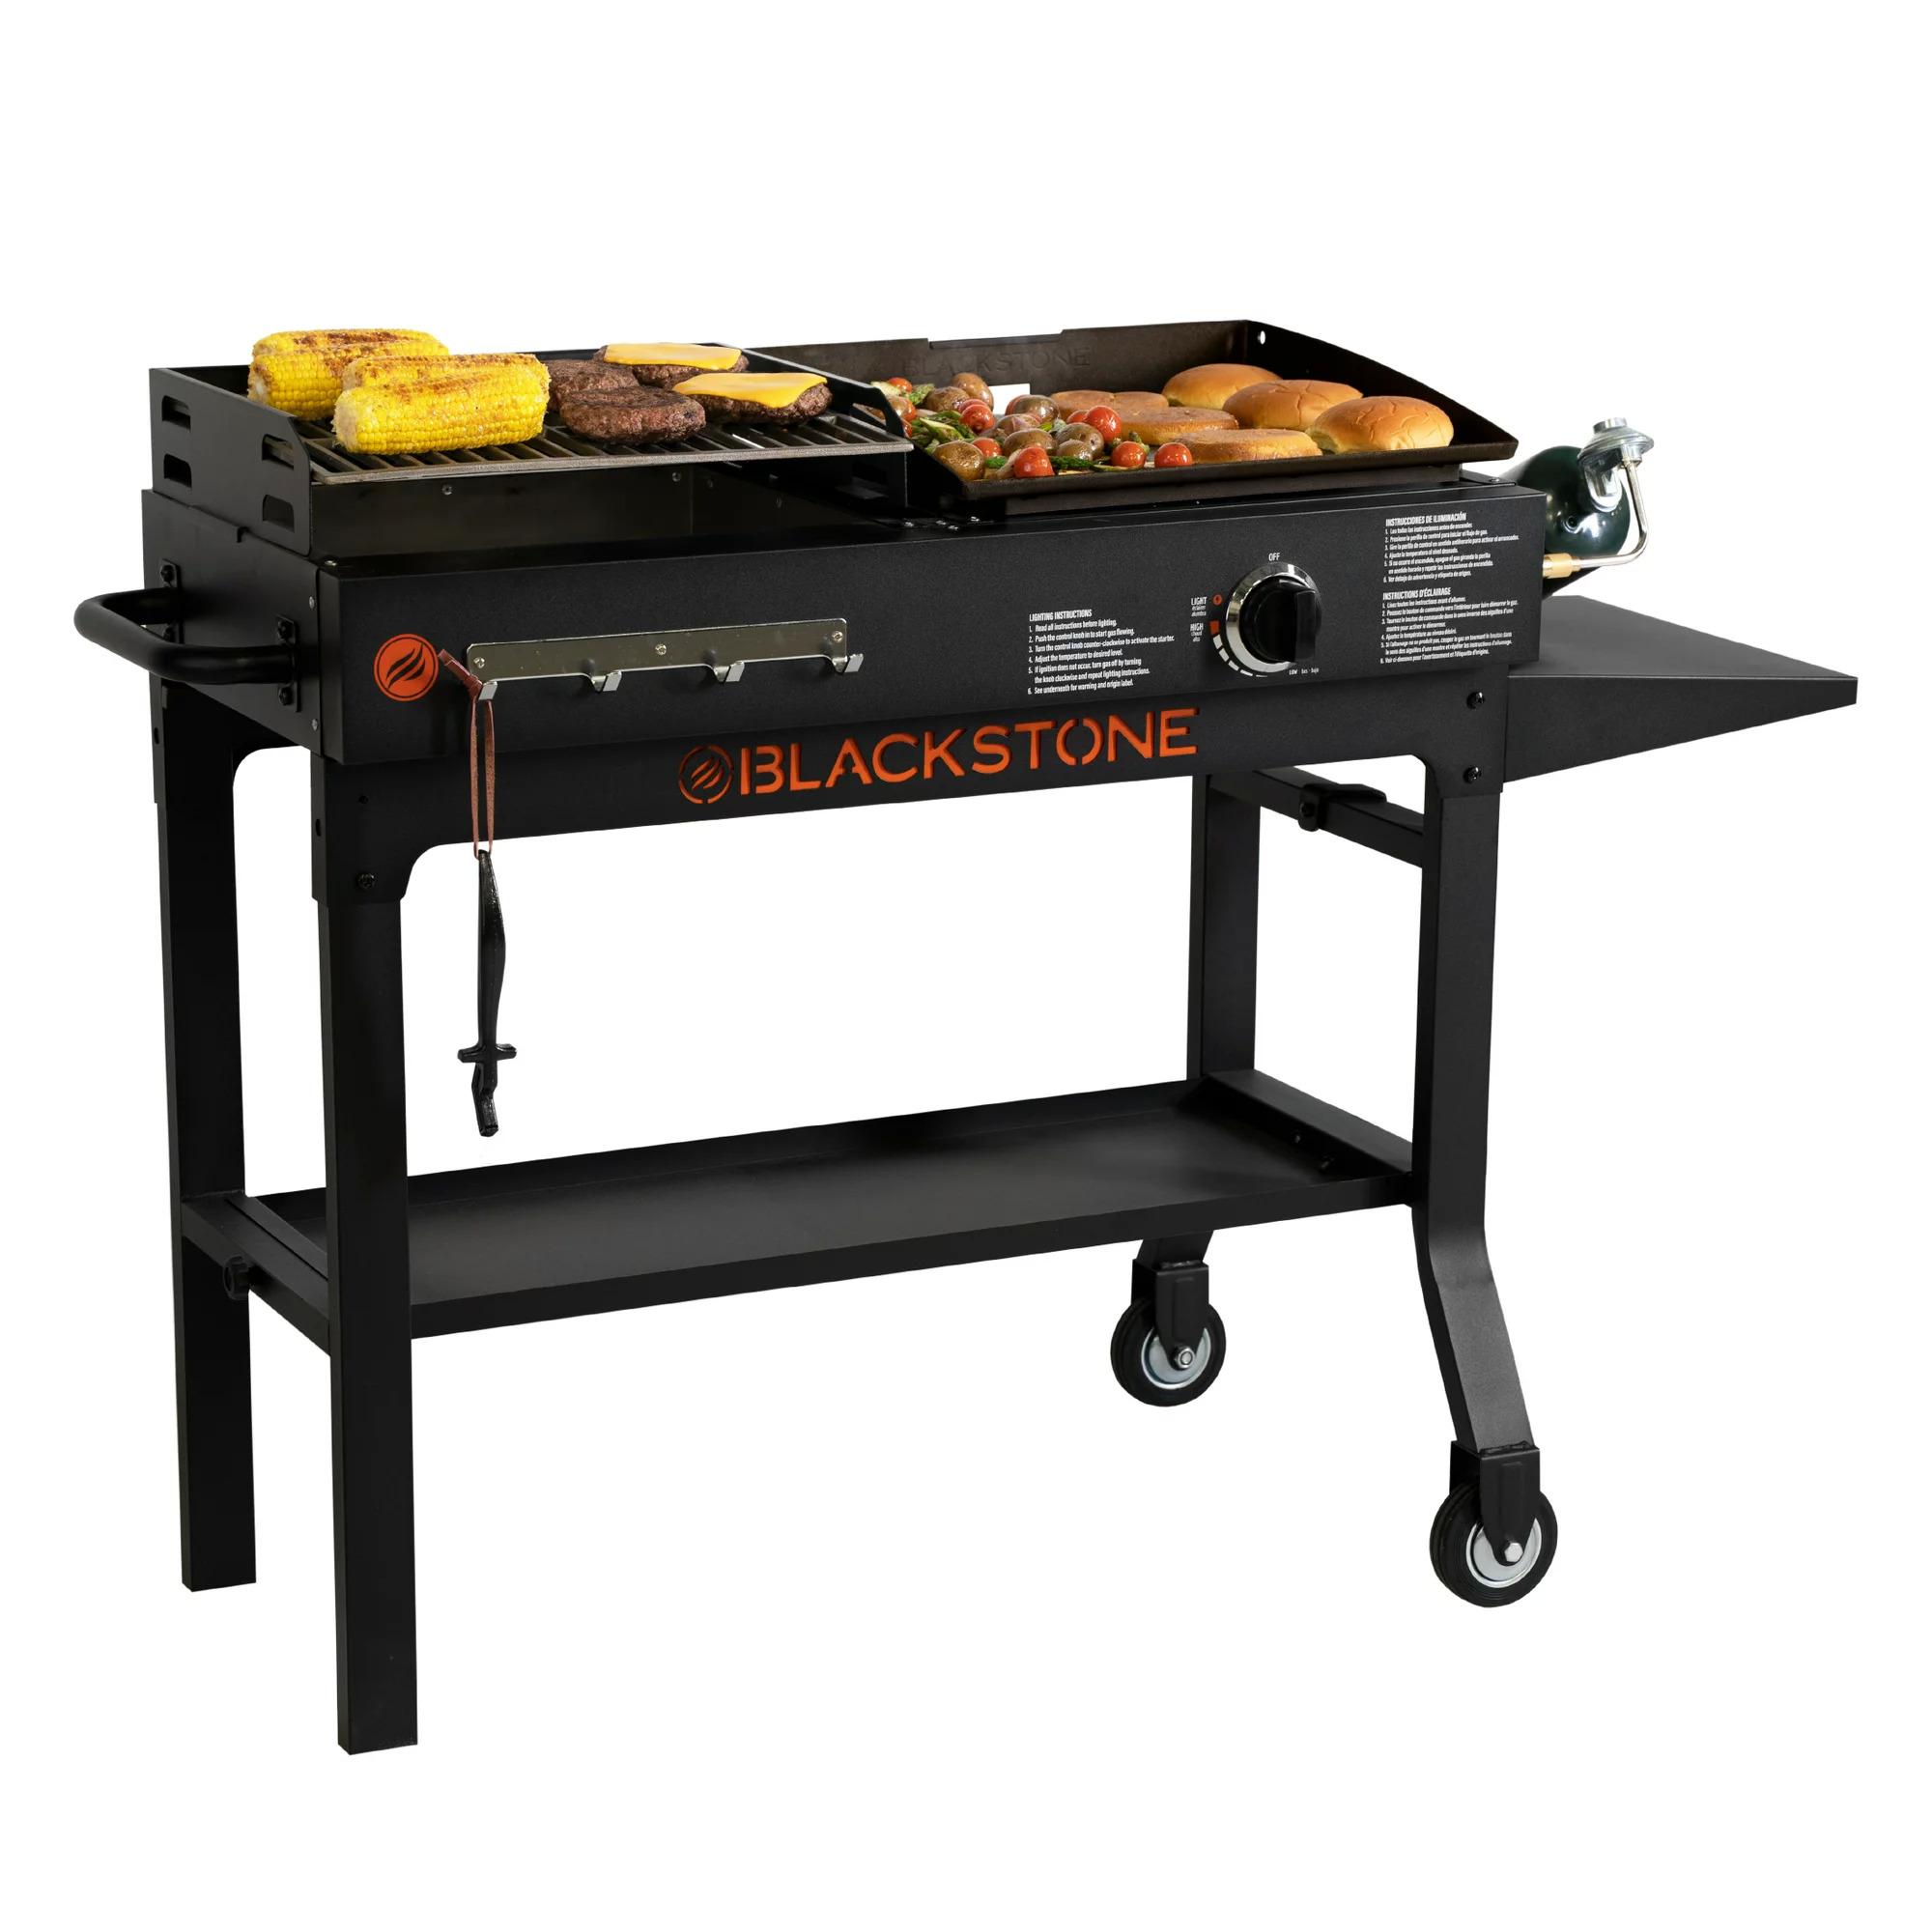 Blackstone Duo 17in Griddle and Charcoal Grill Combo for $177 Shipped